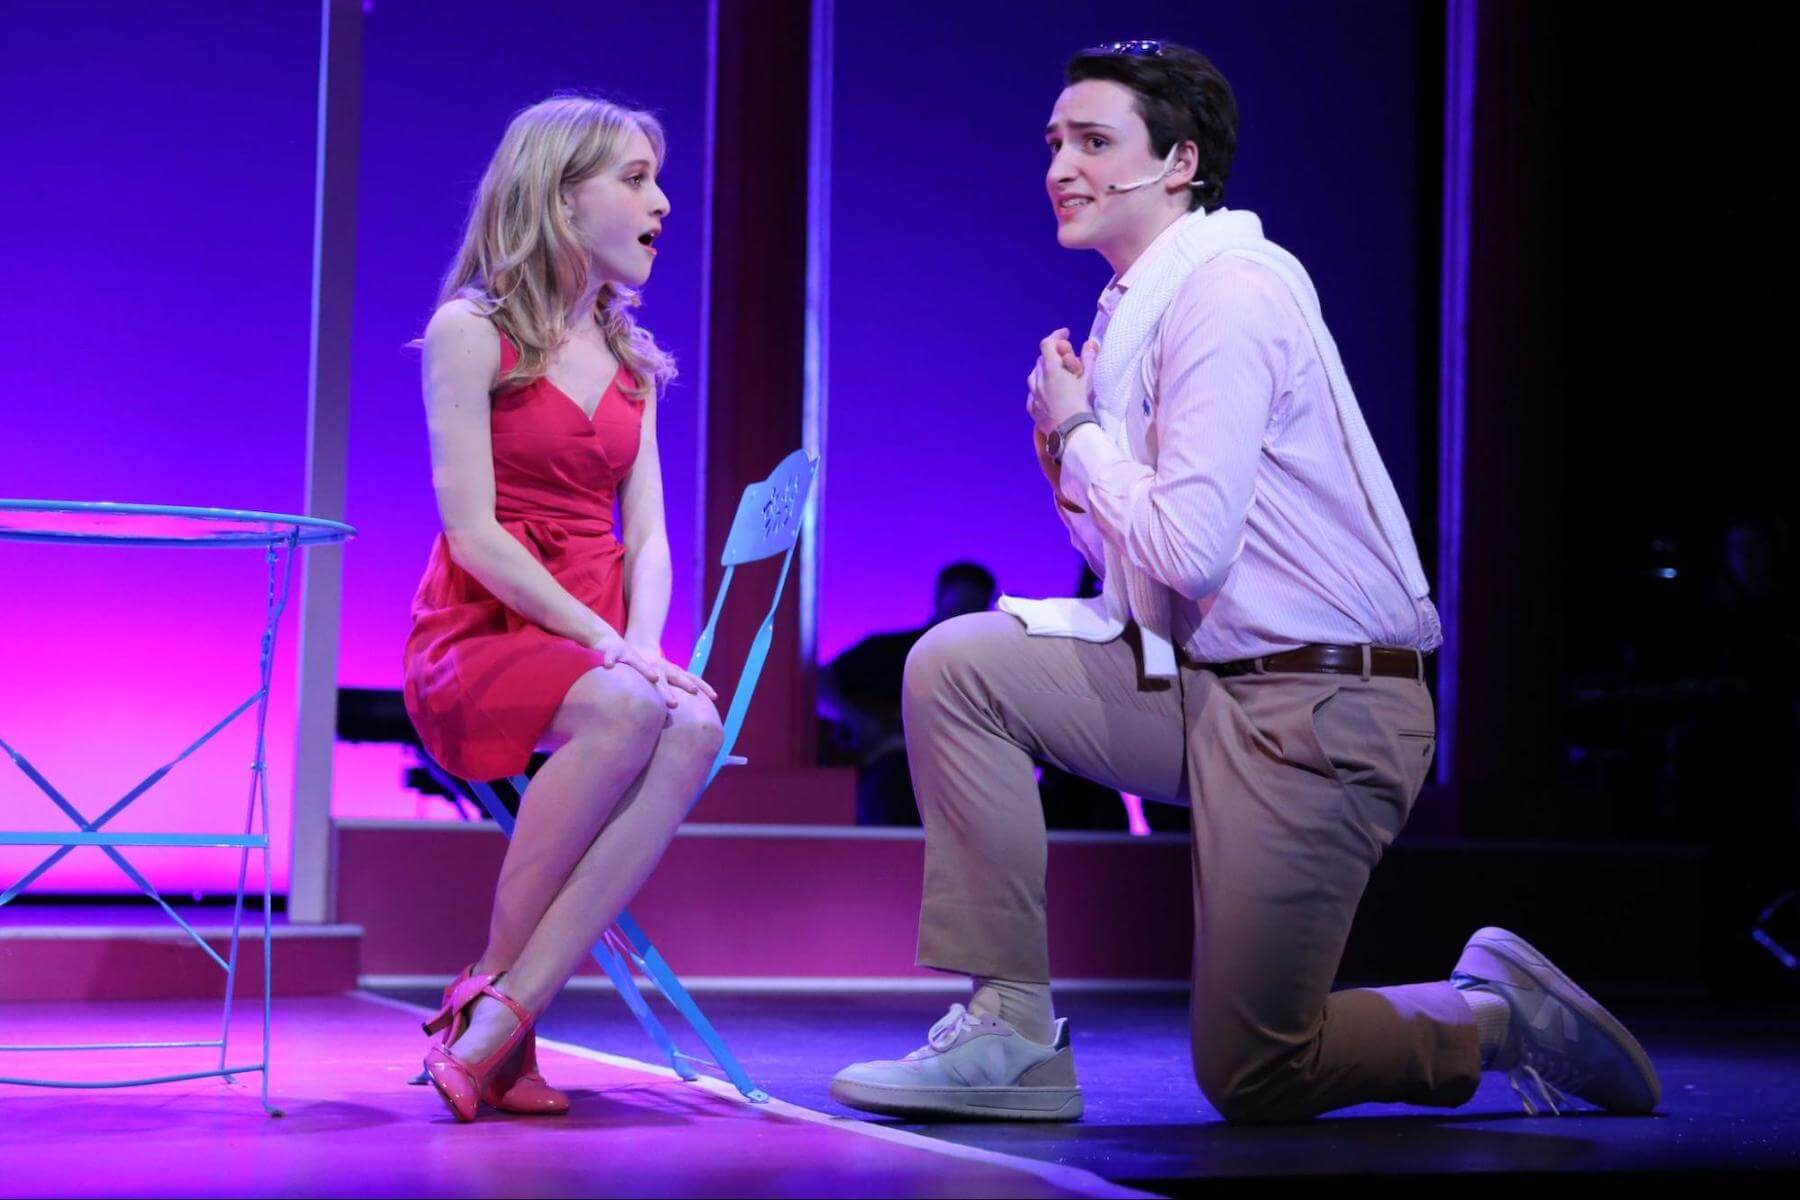 Two Ethical Culture Fieldston Upper School students perform onstage as Elle and Warner in Legally Blonde.